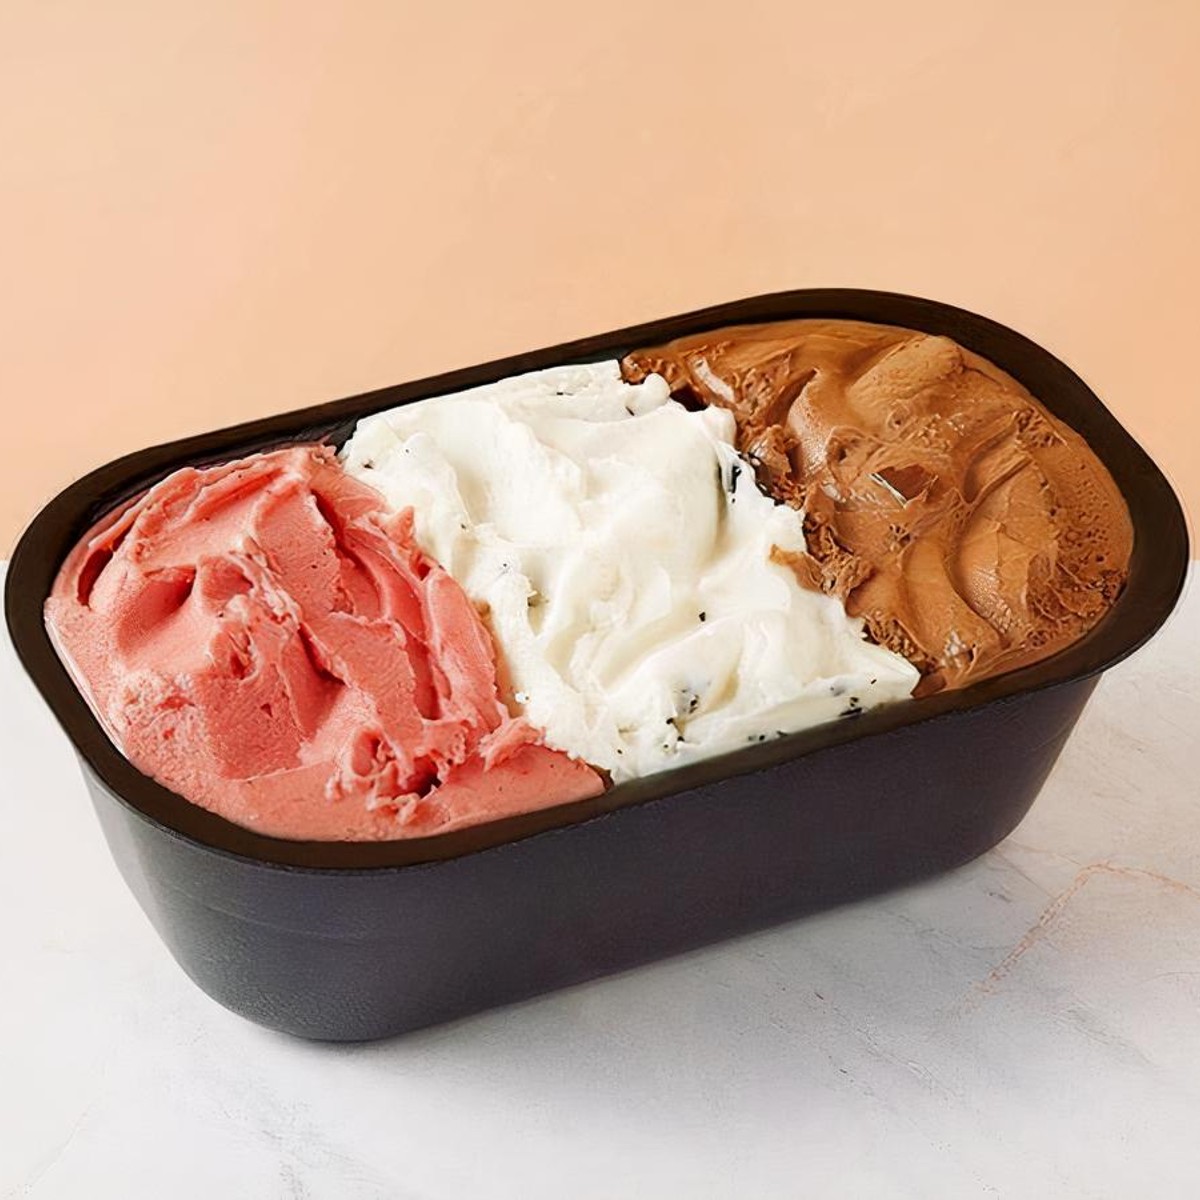 Gelato and Ice Cream To Go Containers - Pint